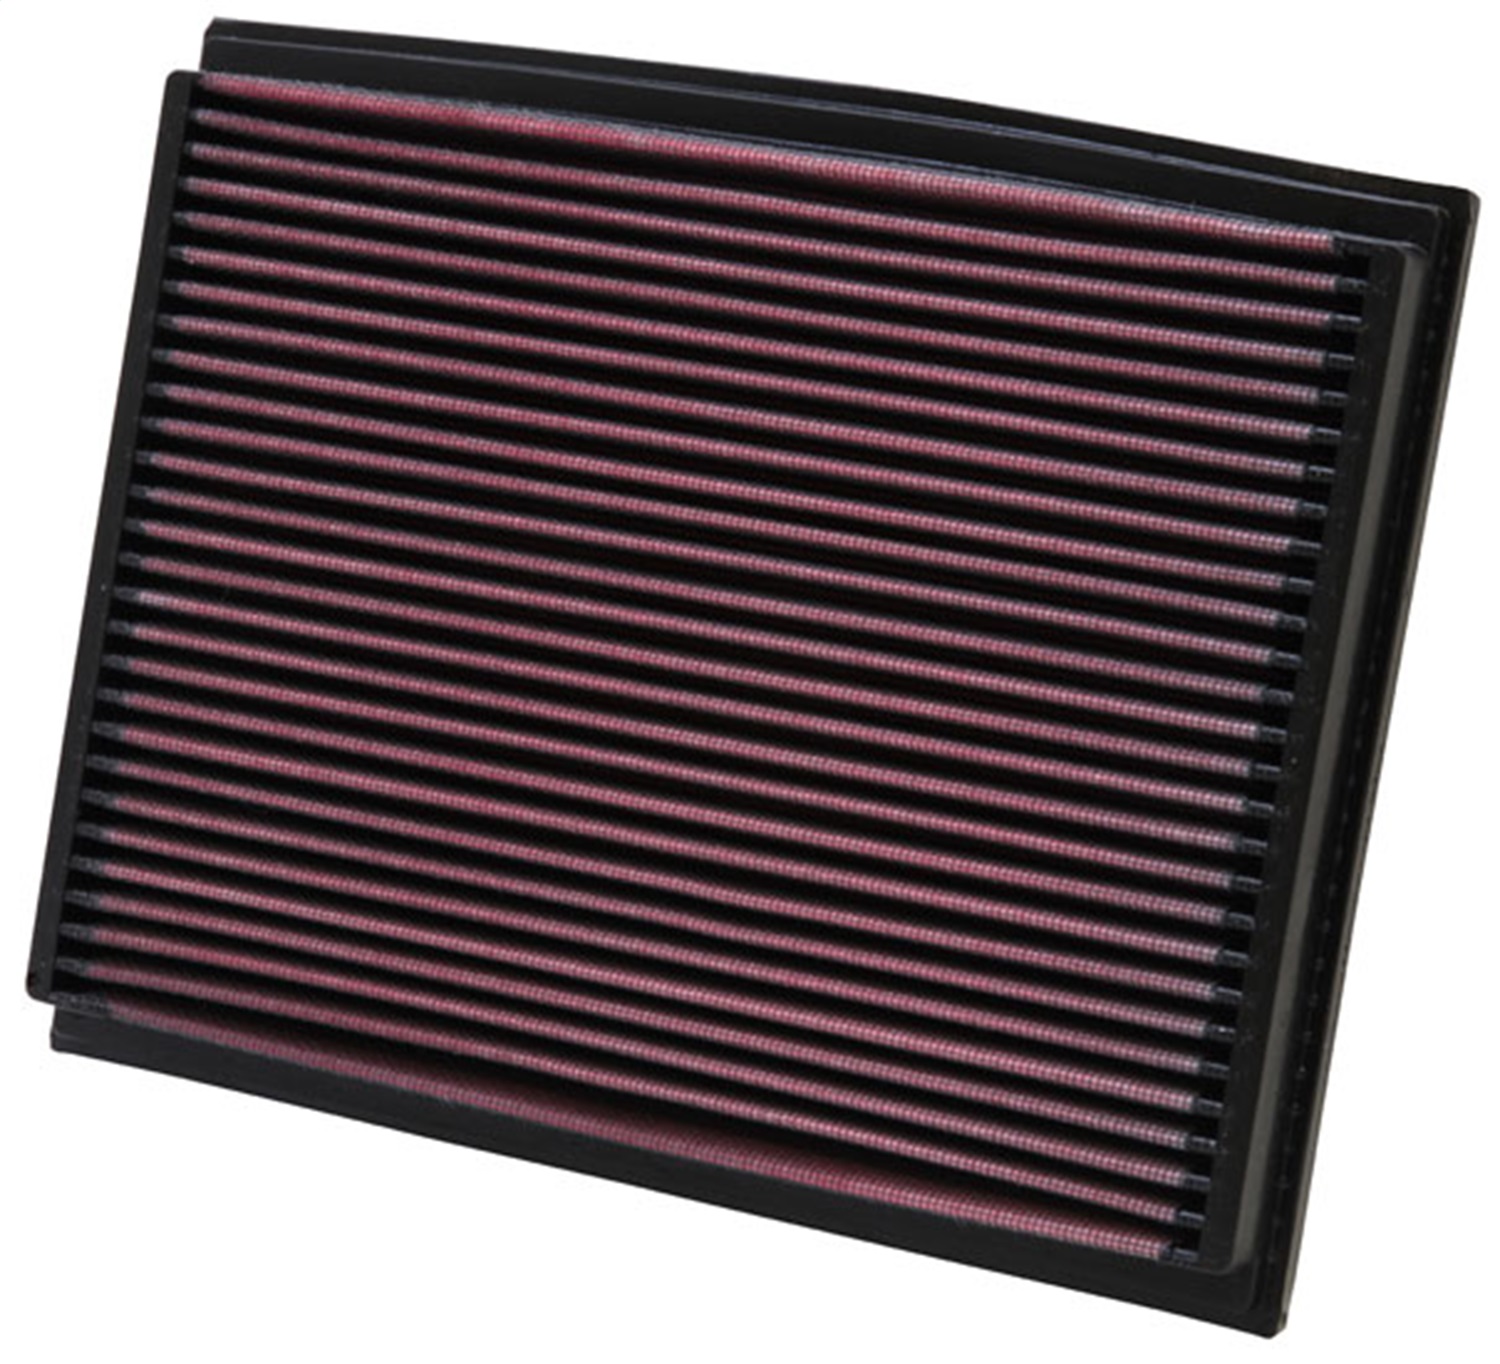 K&N Filters 33-2209 Air Filter Fits 02-09 A4 A4 Quattro RS4 S4